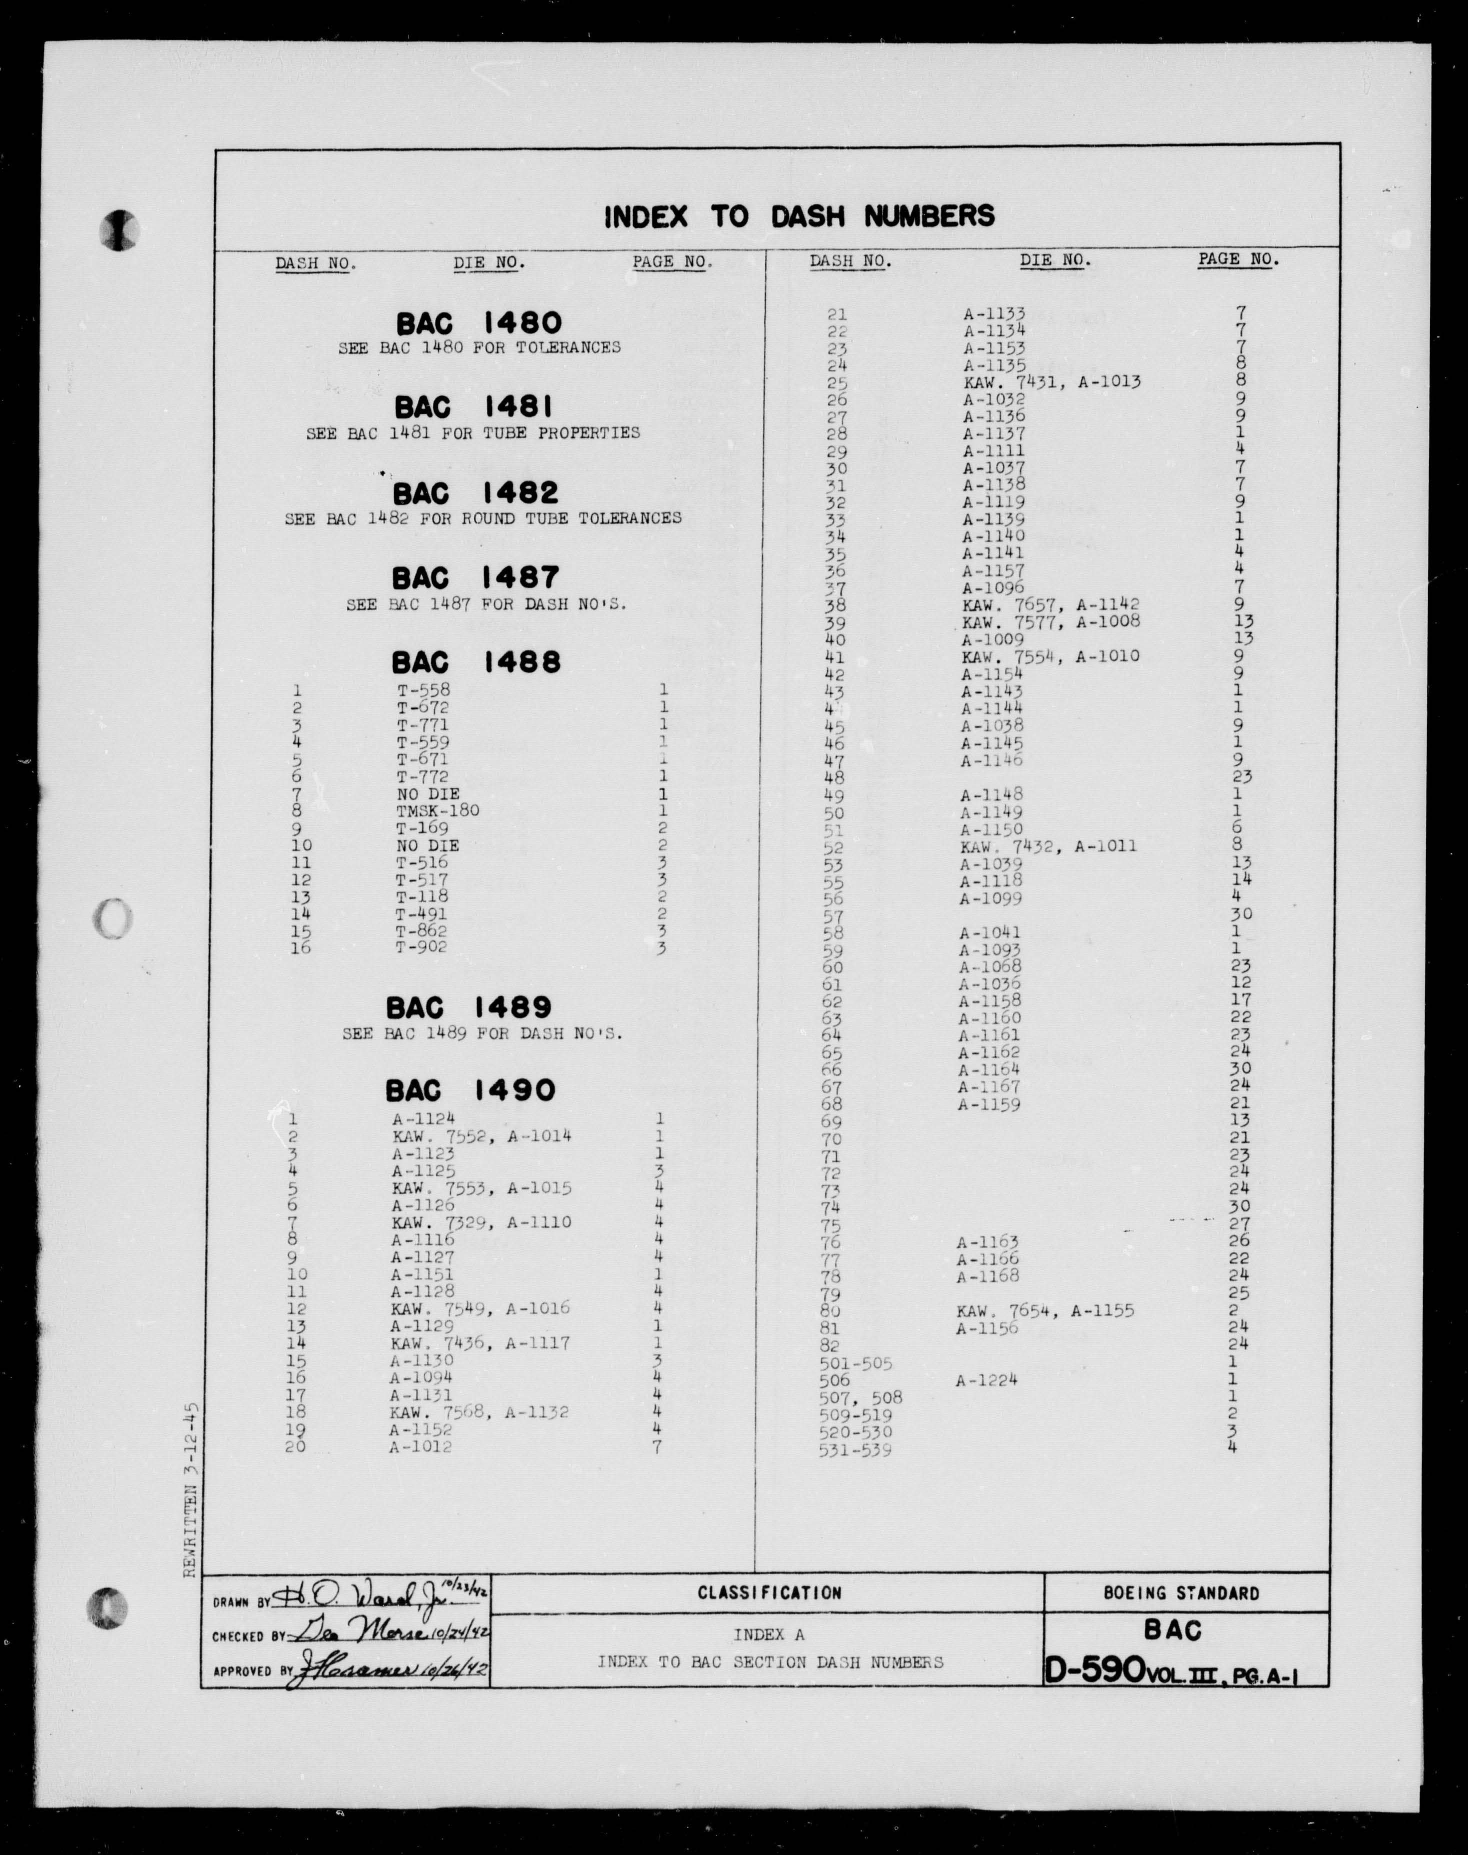 Sample page 1 from AirCorps Library document: Index to BAC Section Dash Numbers - Index A